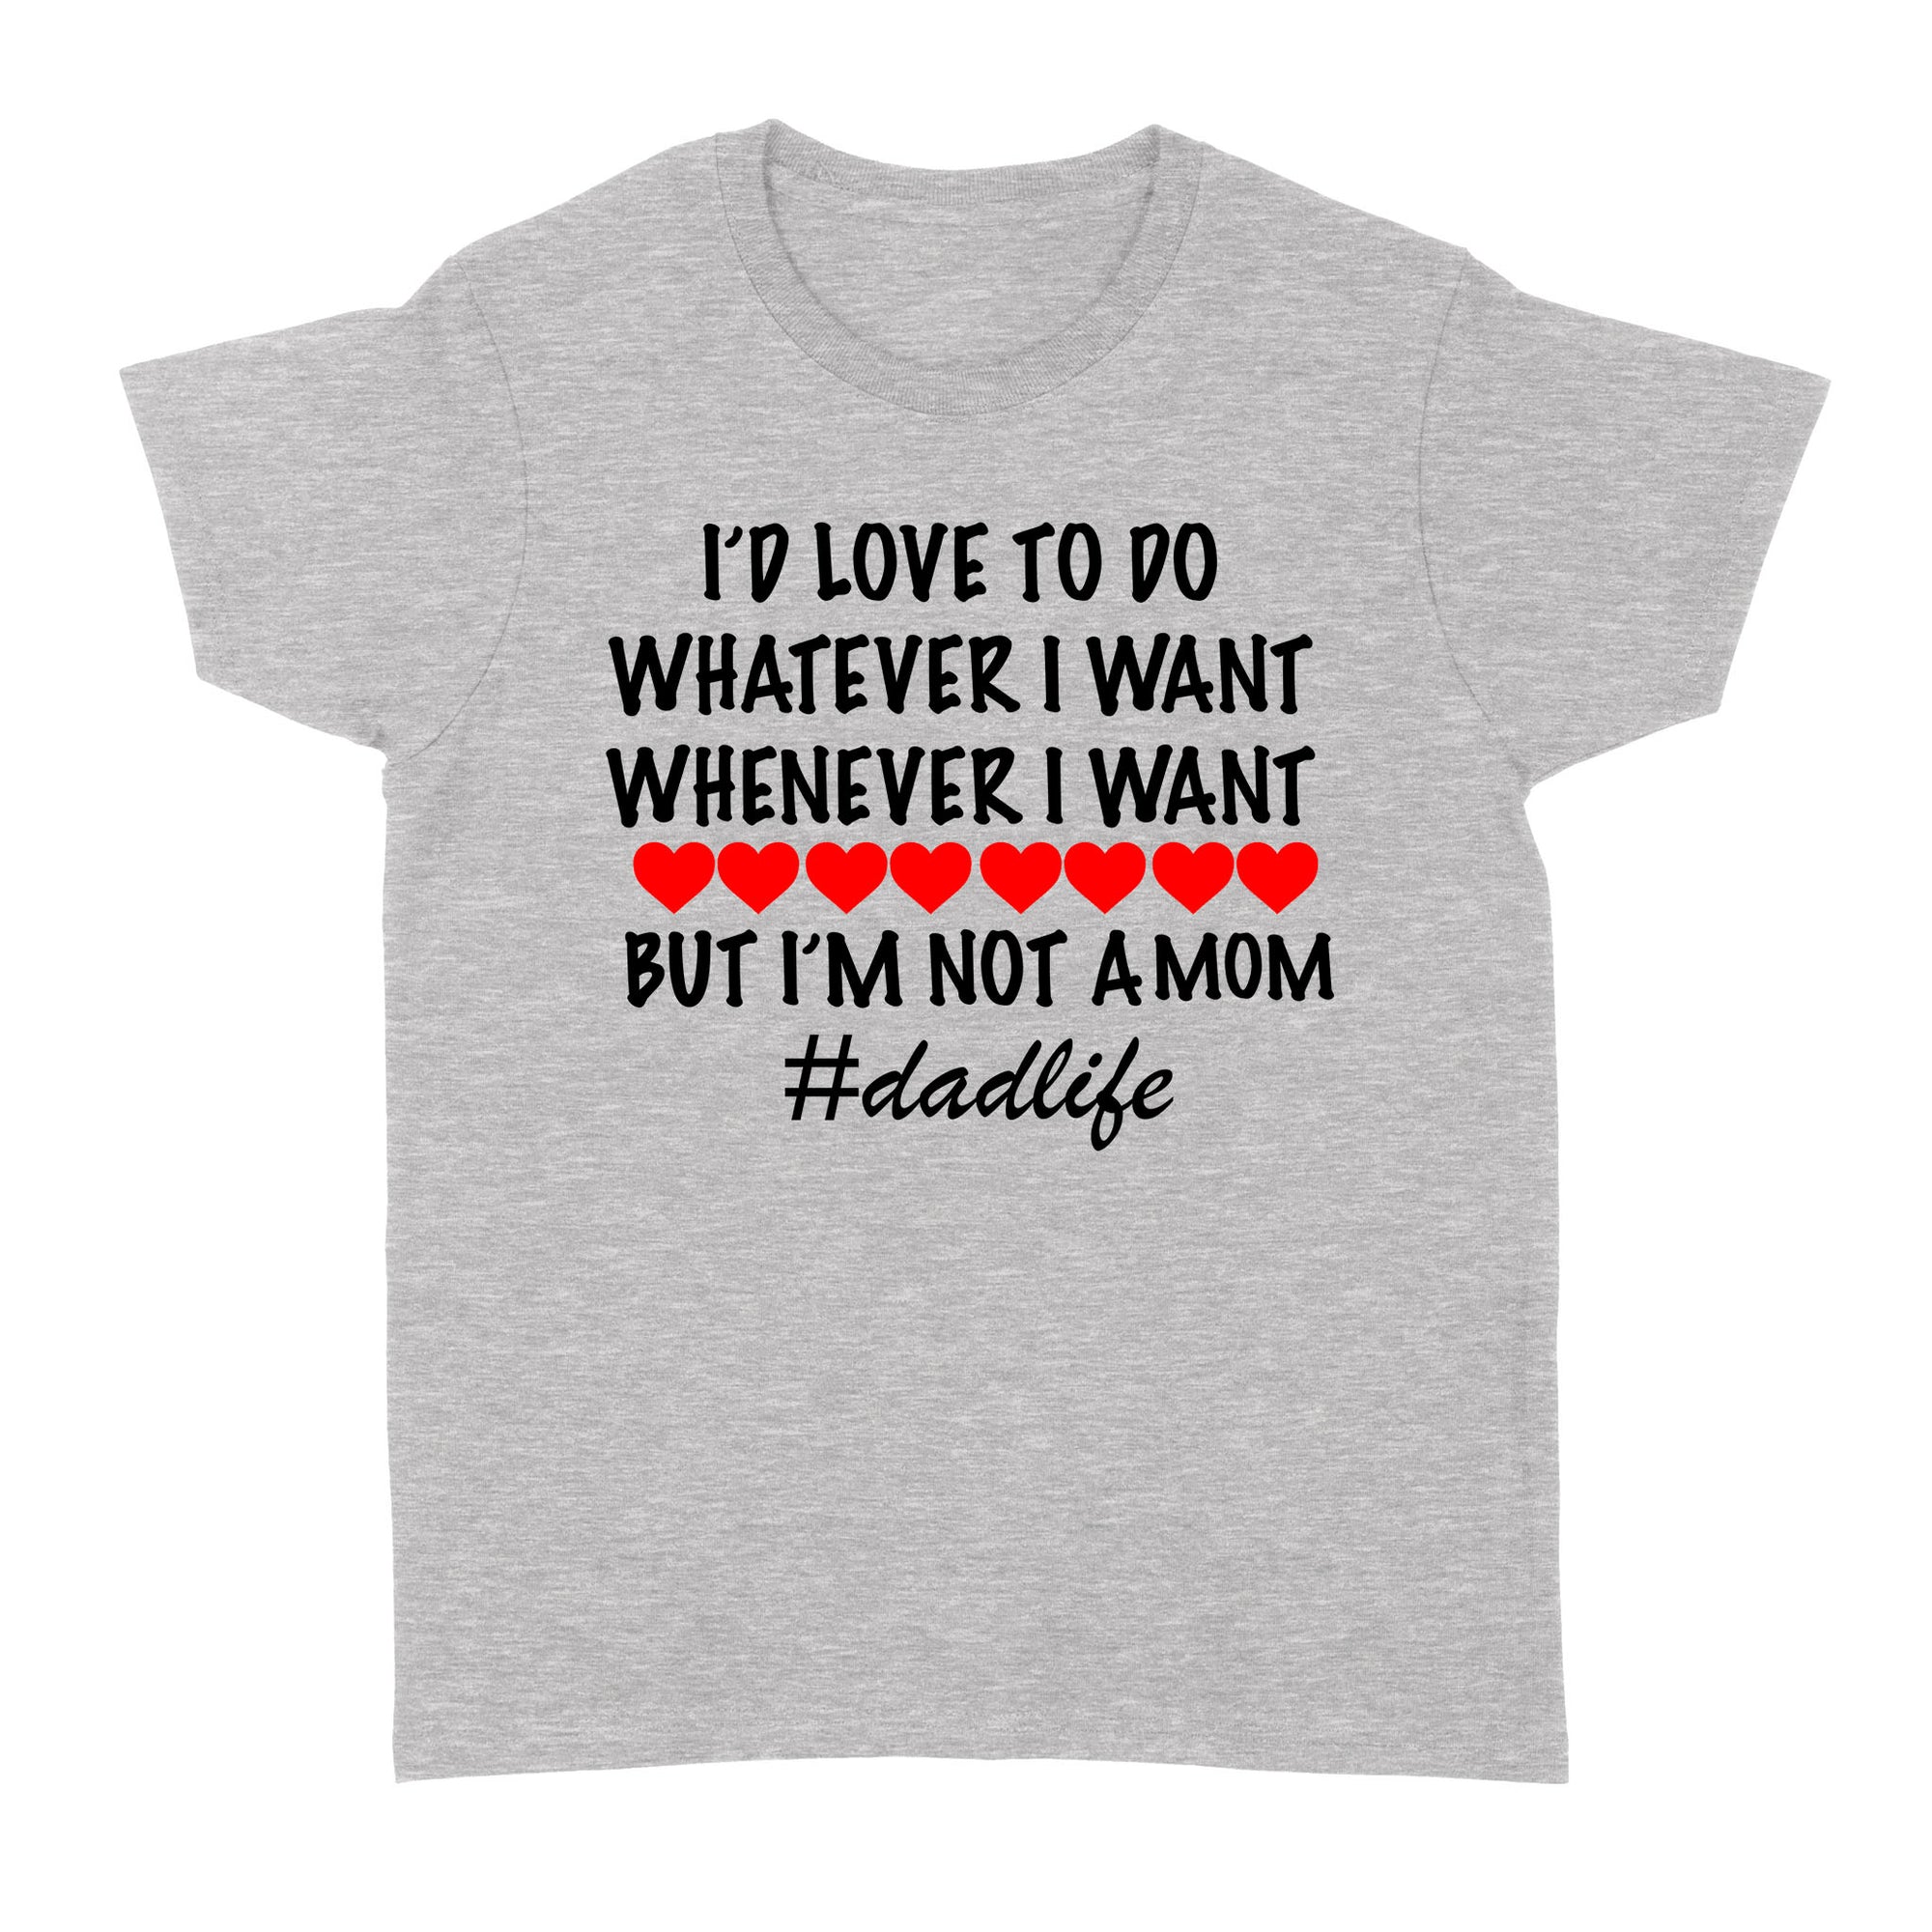 Gift Ideas for Mom Mothers Day I'd Love To Do Whatever I Want Whenever I Want But I'm Not A Mom (Dadlife) (w) - Standard Women's T-shirt